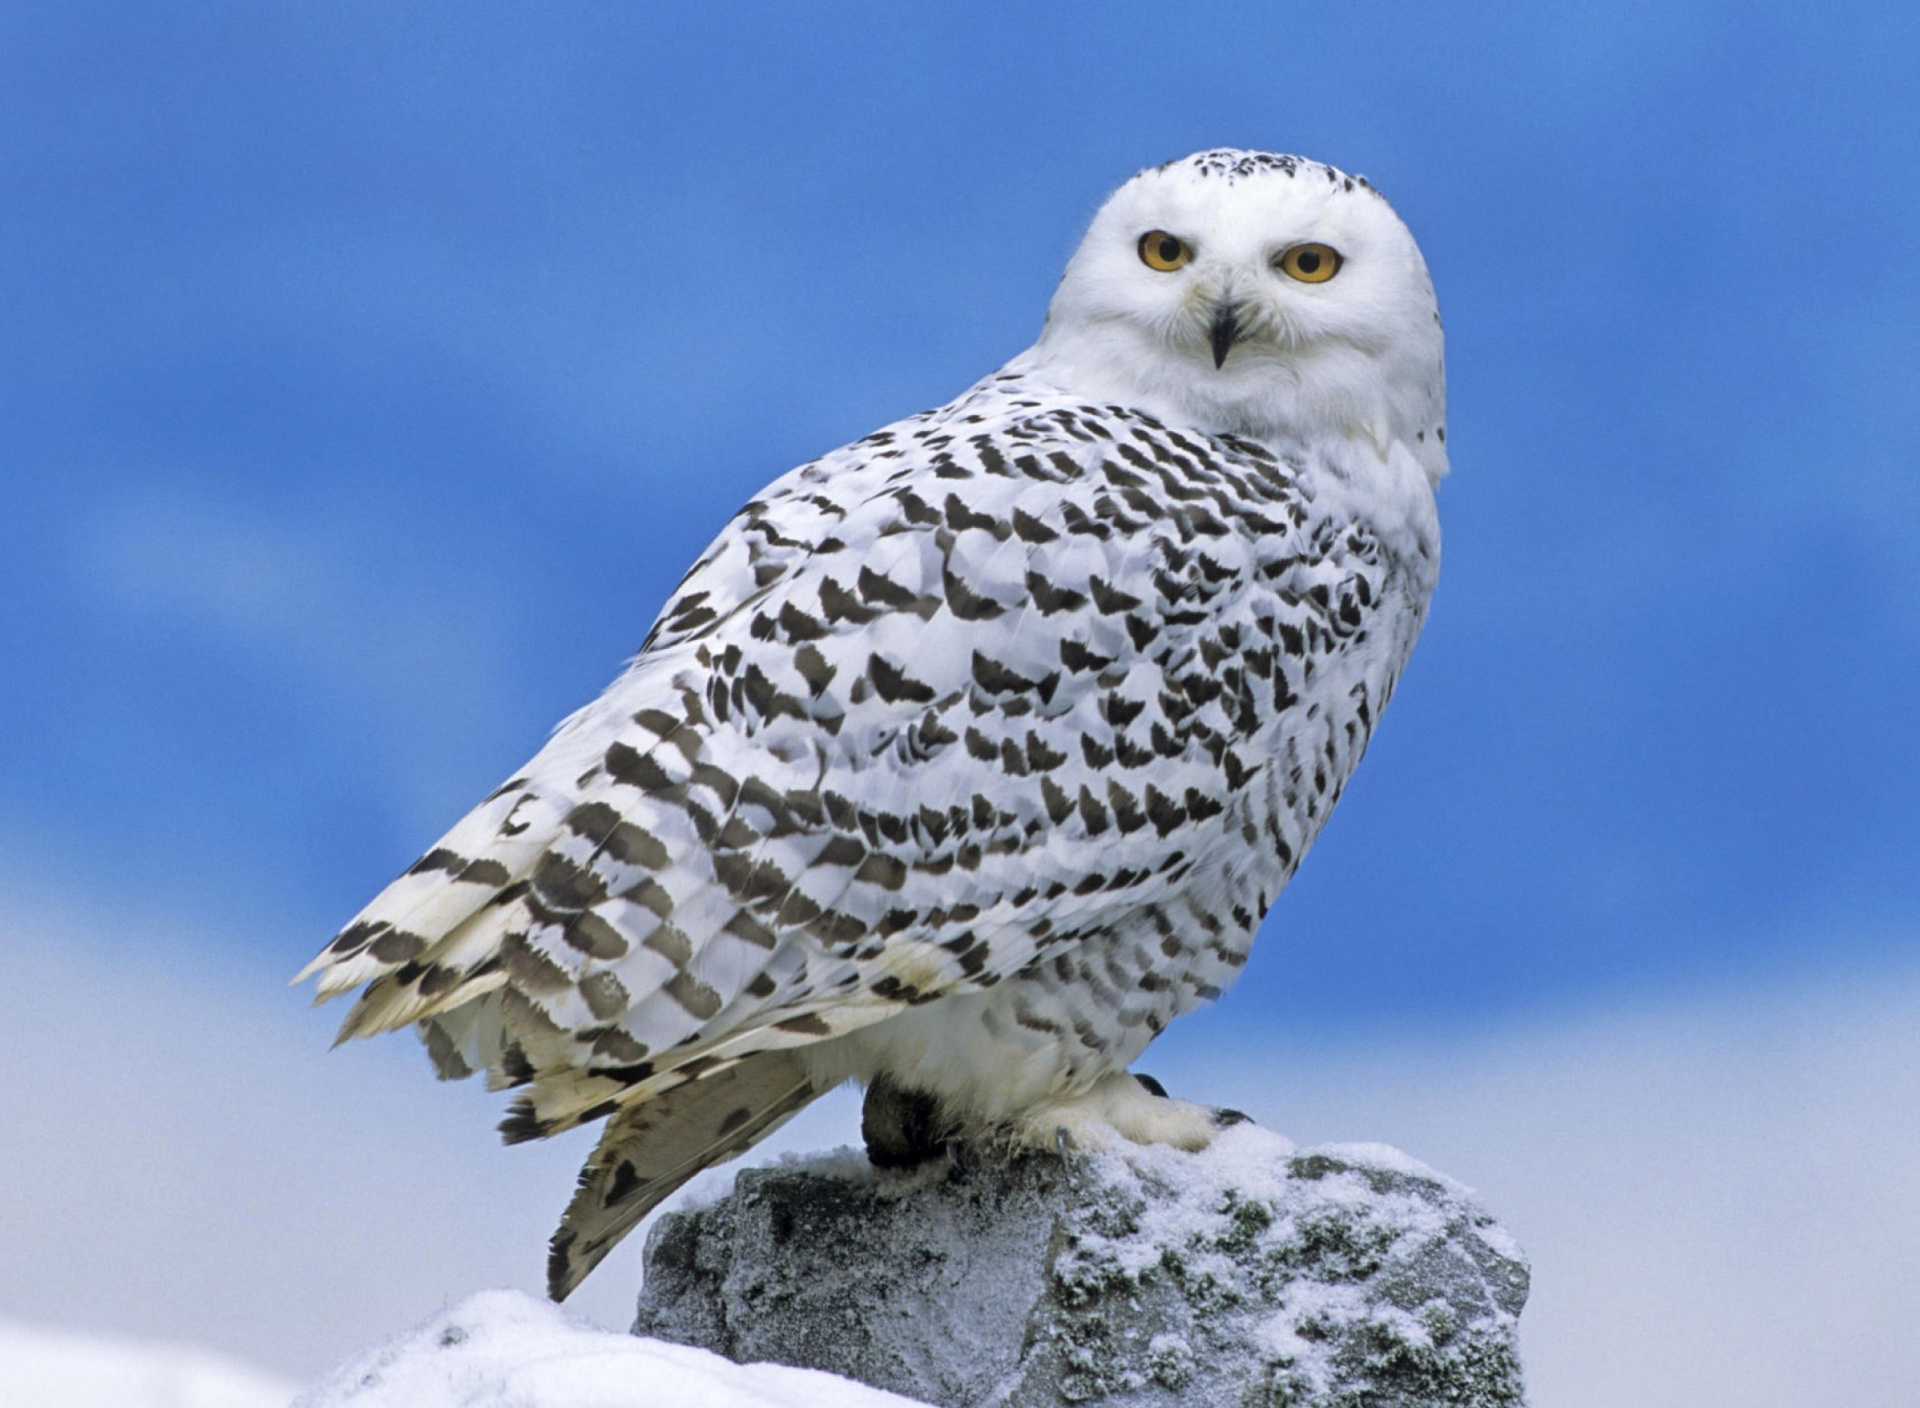 Snowy owl from Arctic wallpaper 1920x1408